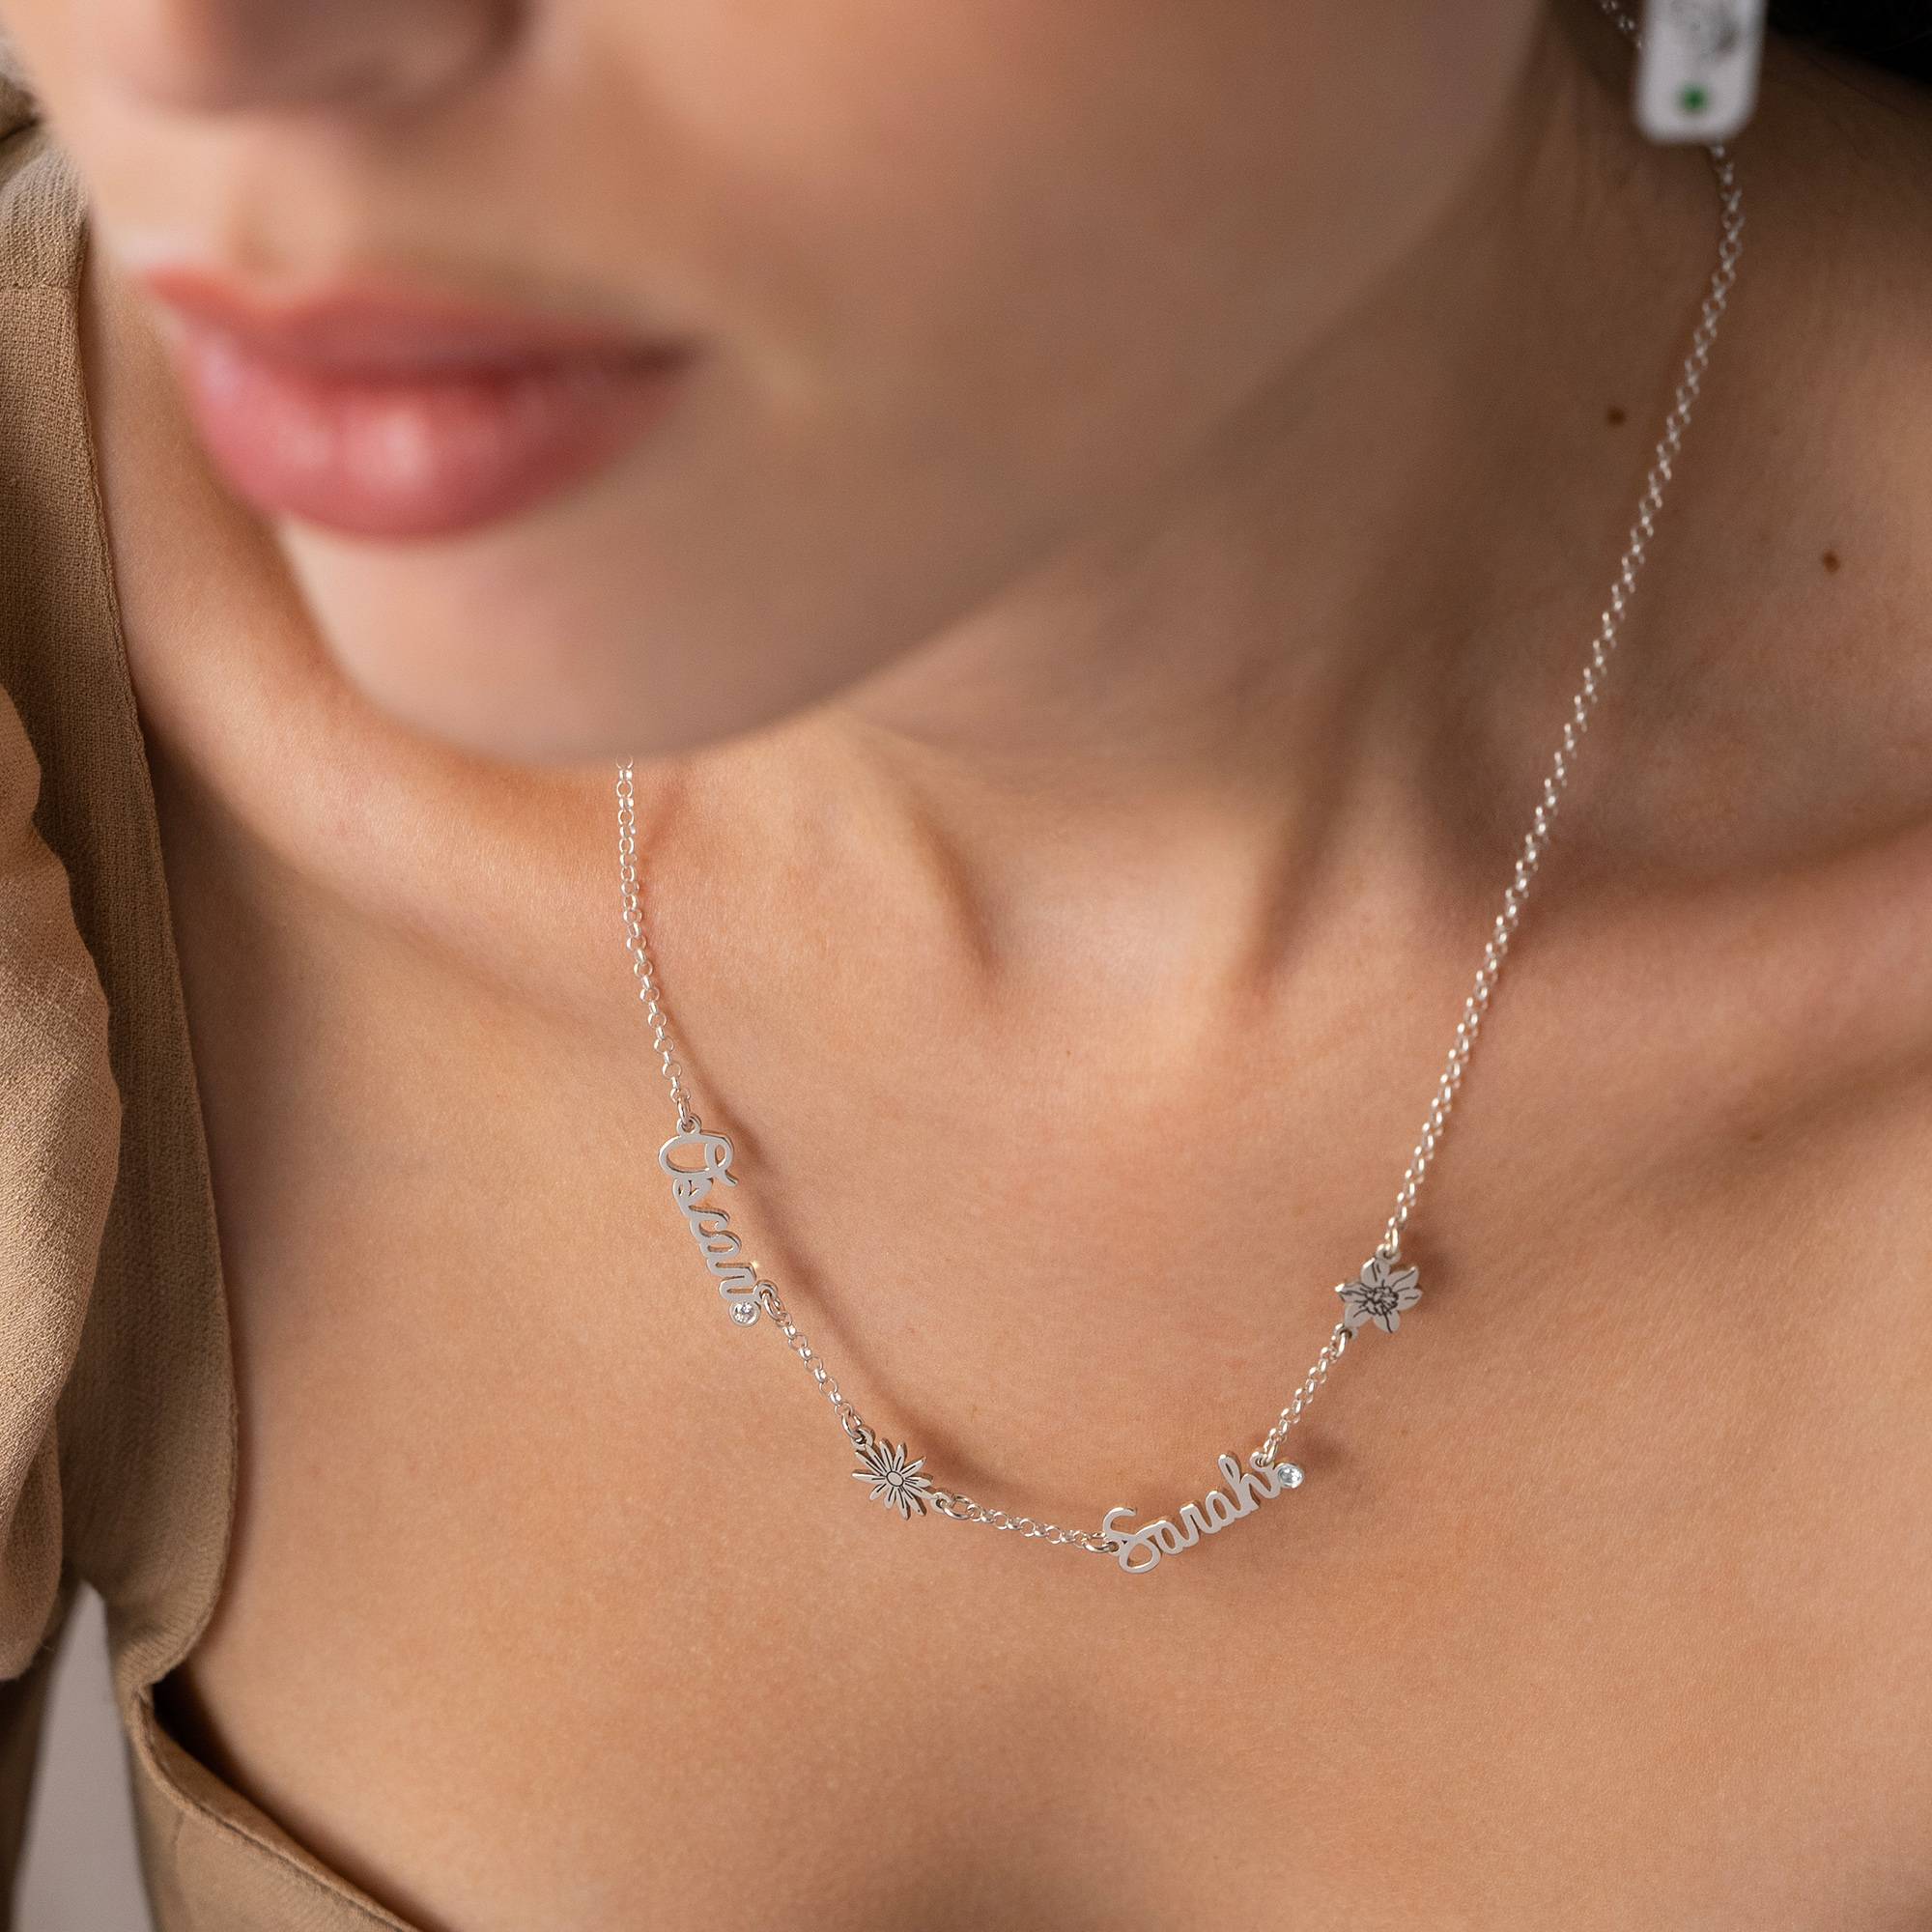 Blooming Birth Flower Multi Name Necklace with Diamond in Sterling Silver-1 product photo